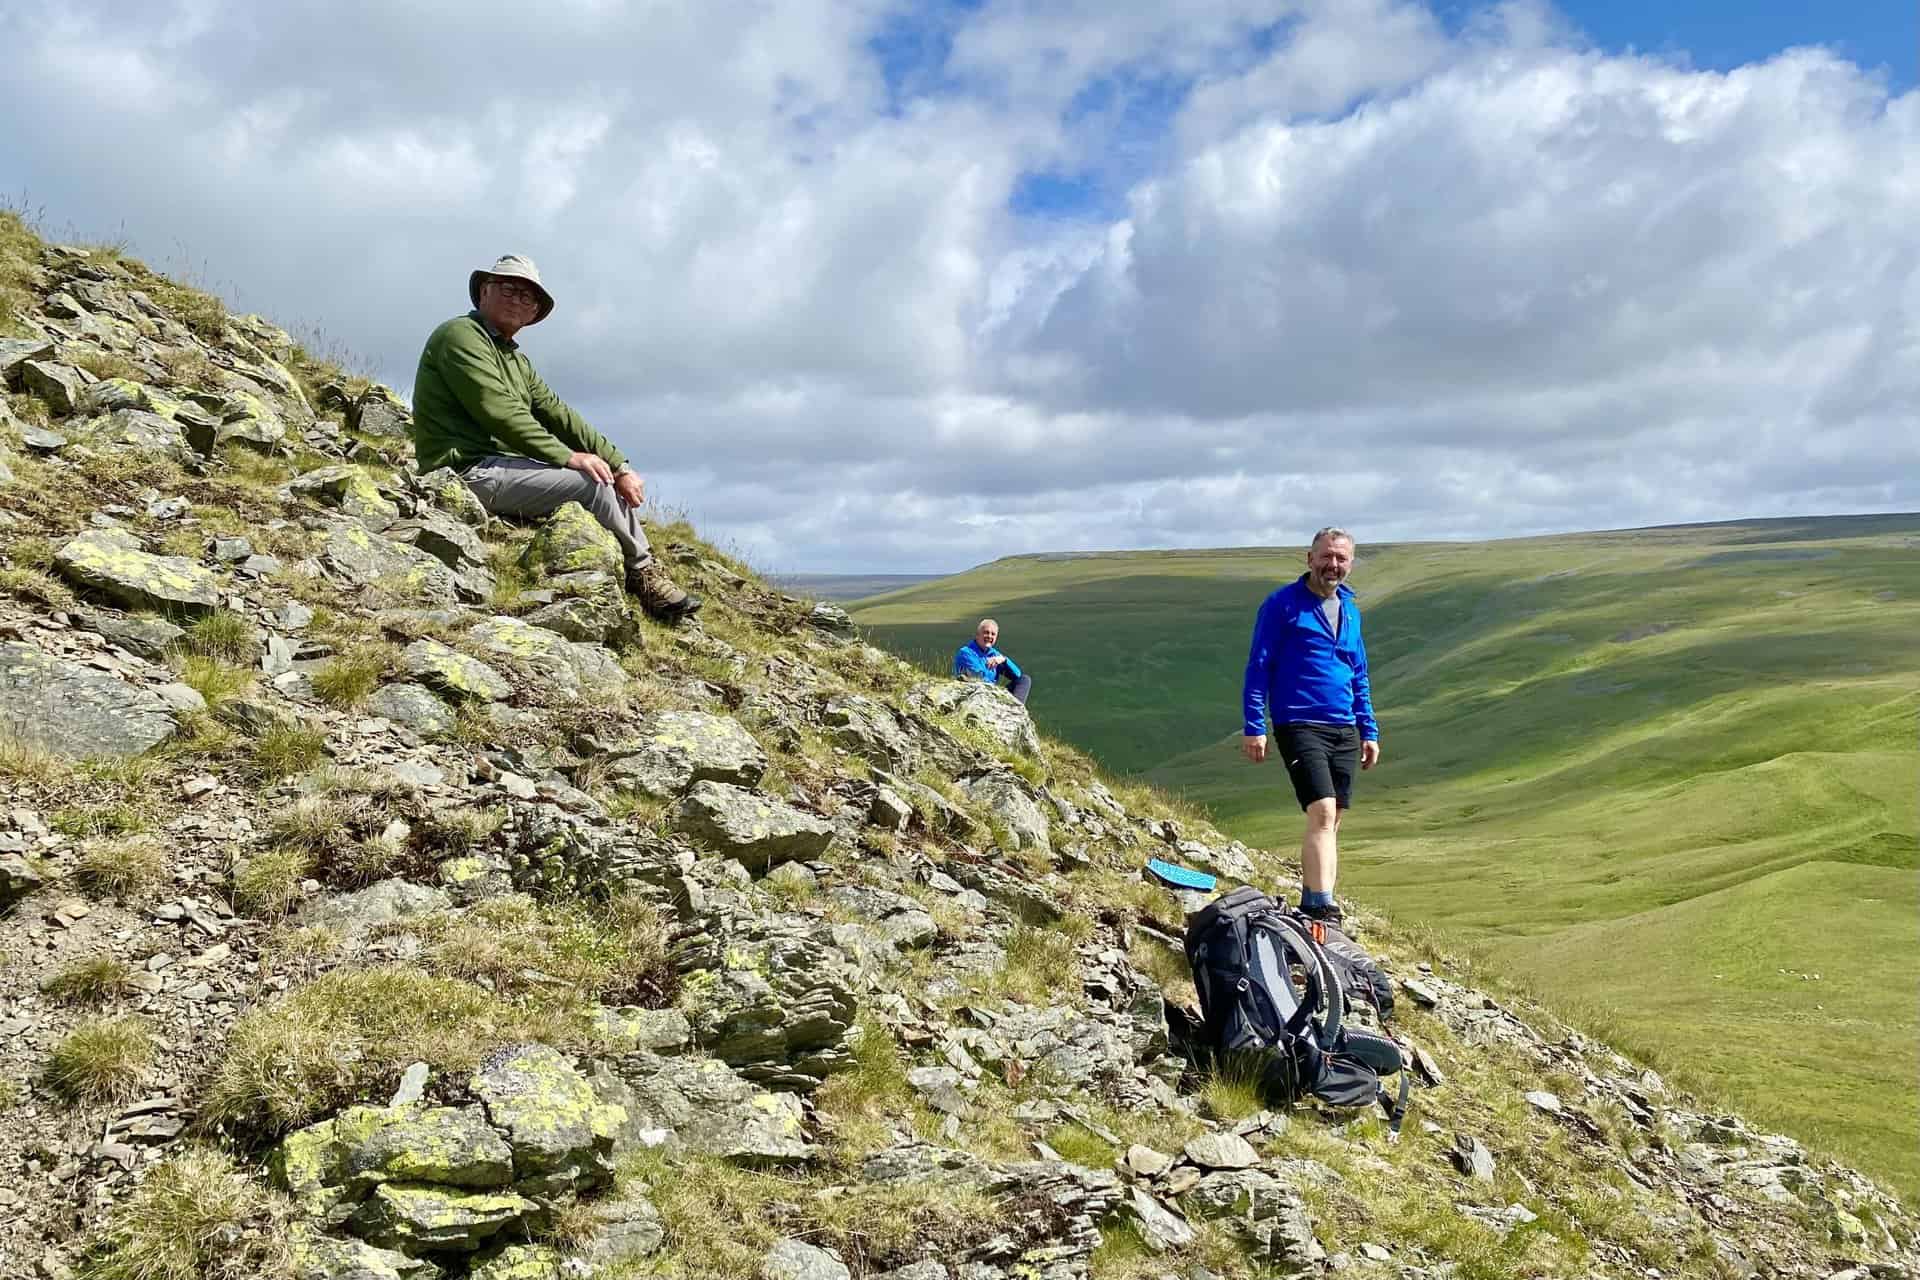 Time for a break on the eastern flanks of Murton Pike.